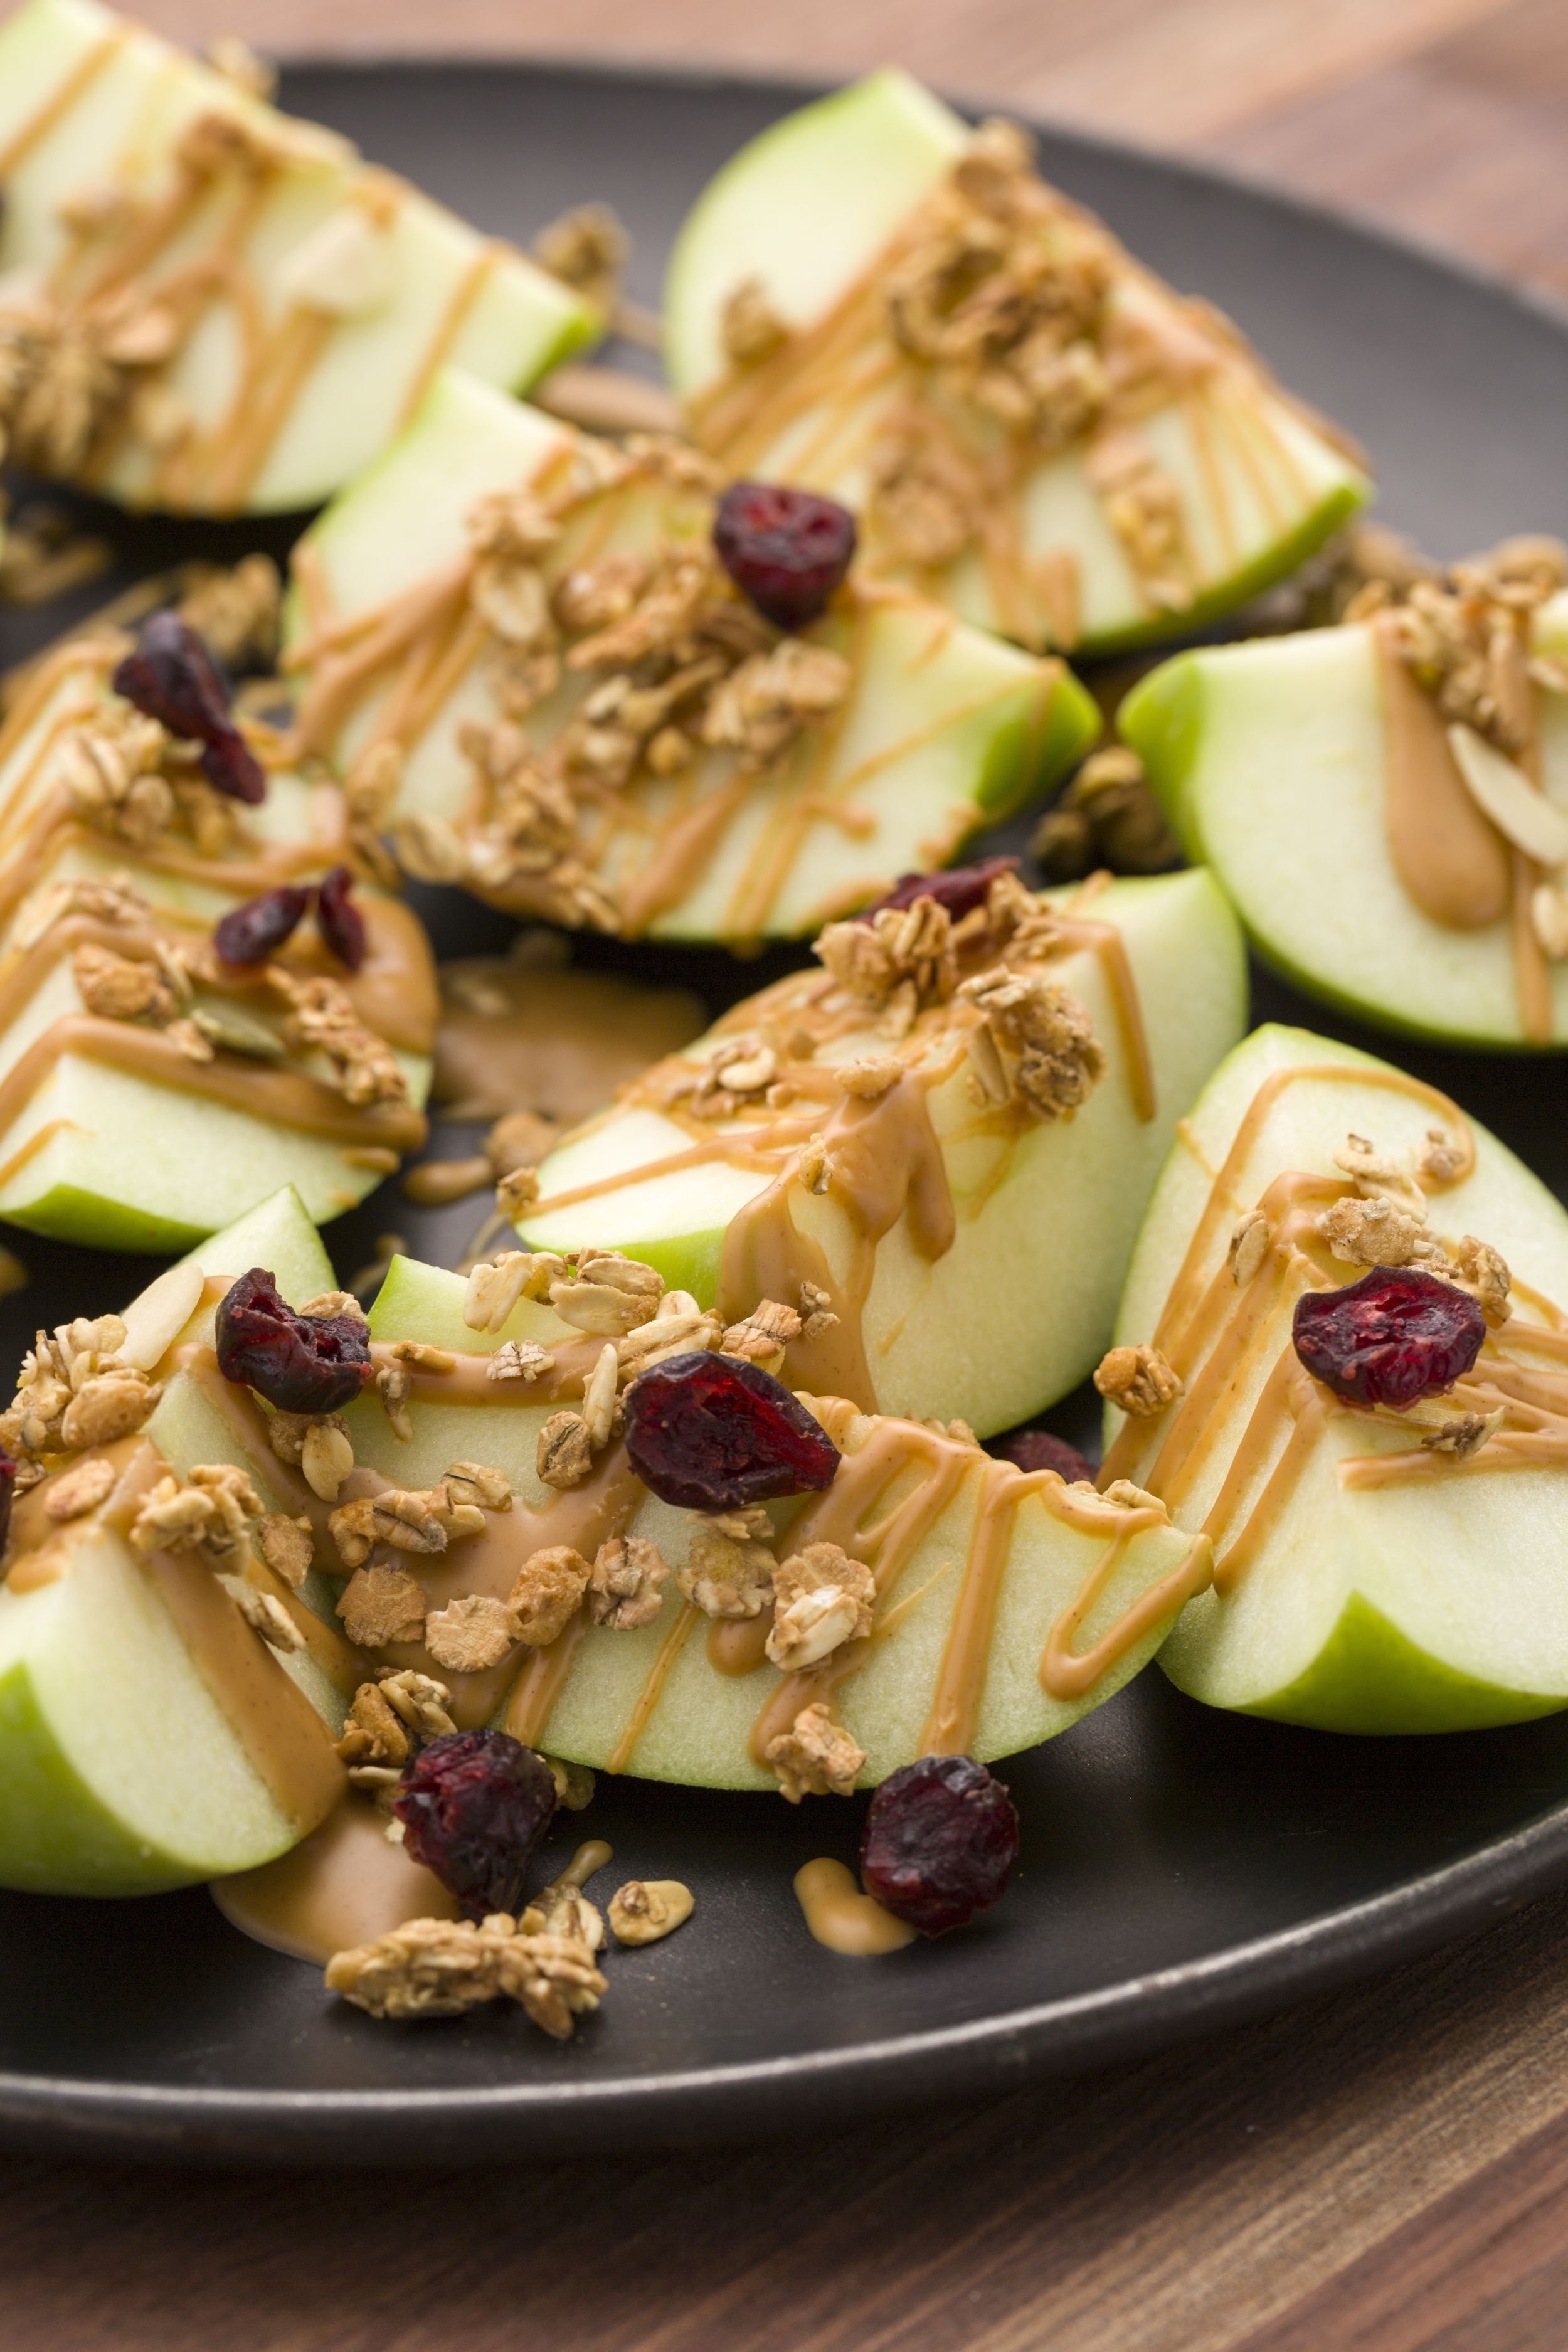 10 Nice Healthy Snack Ideas For Adults 2021